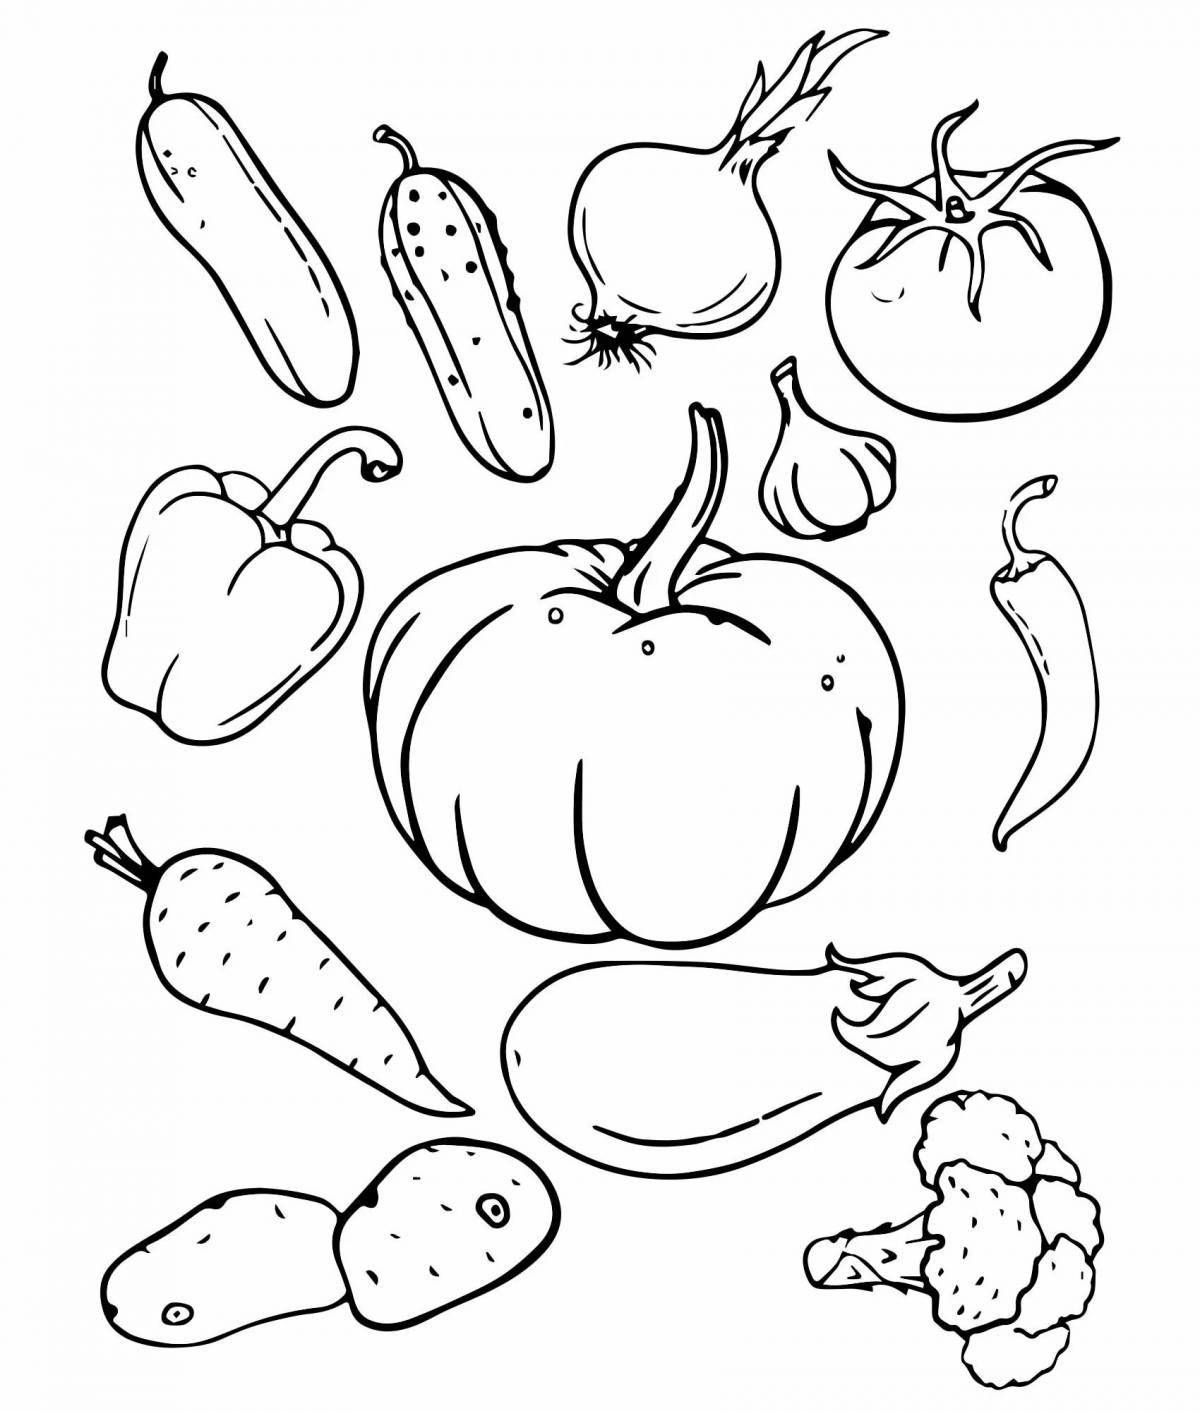 Colorful and entertaining coloring of vegetables for children